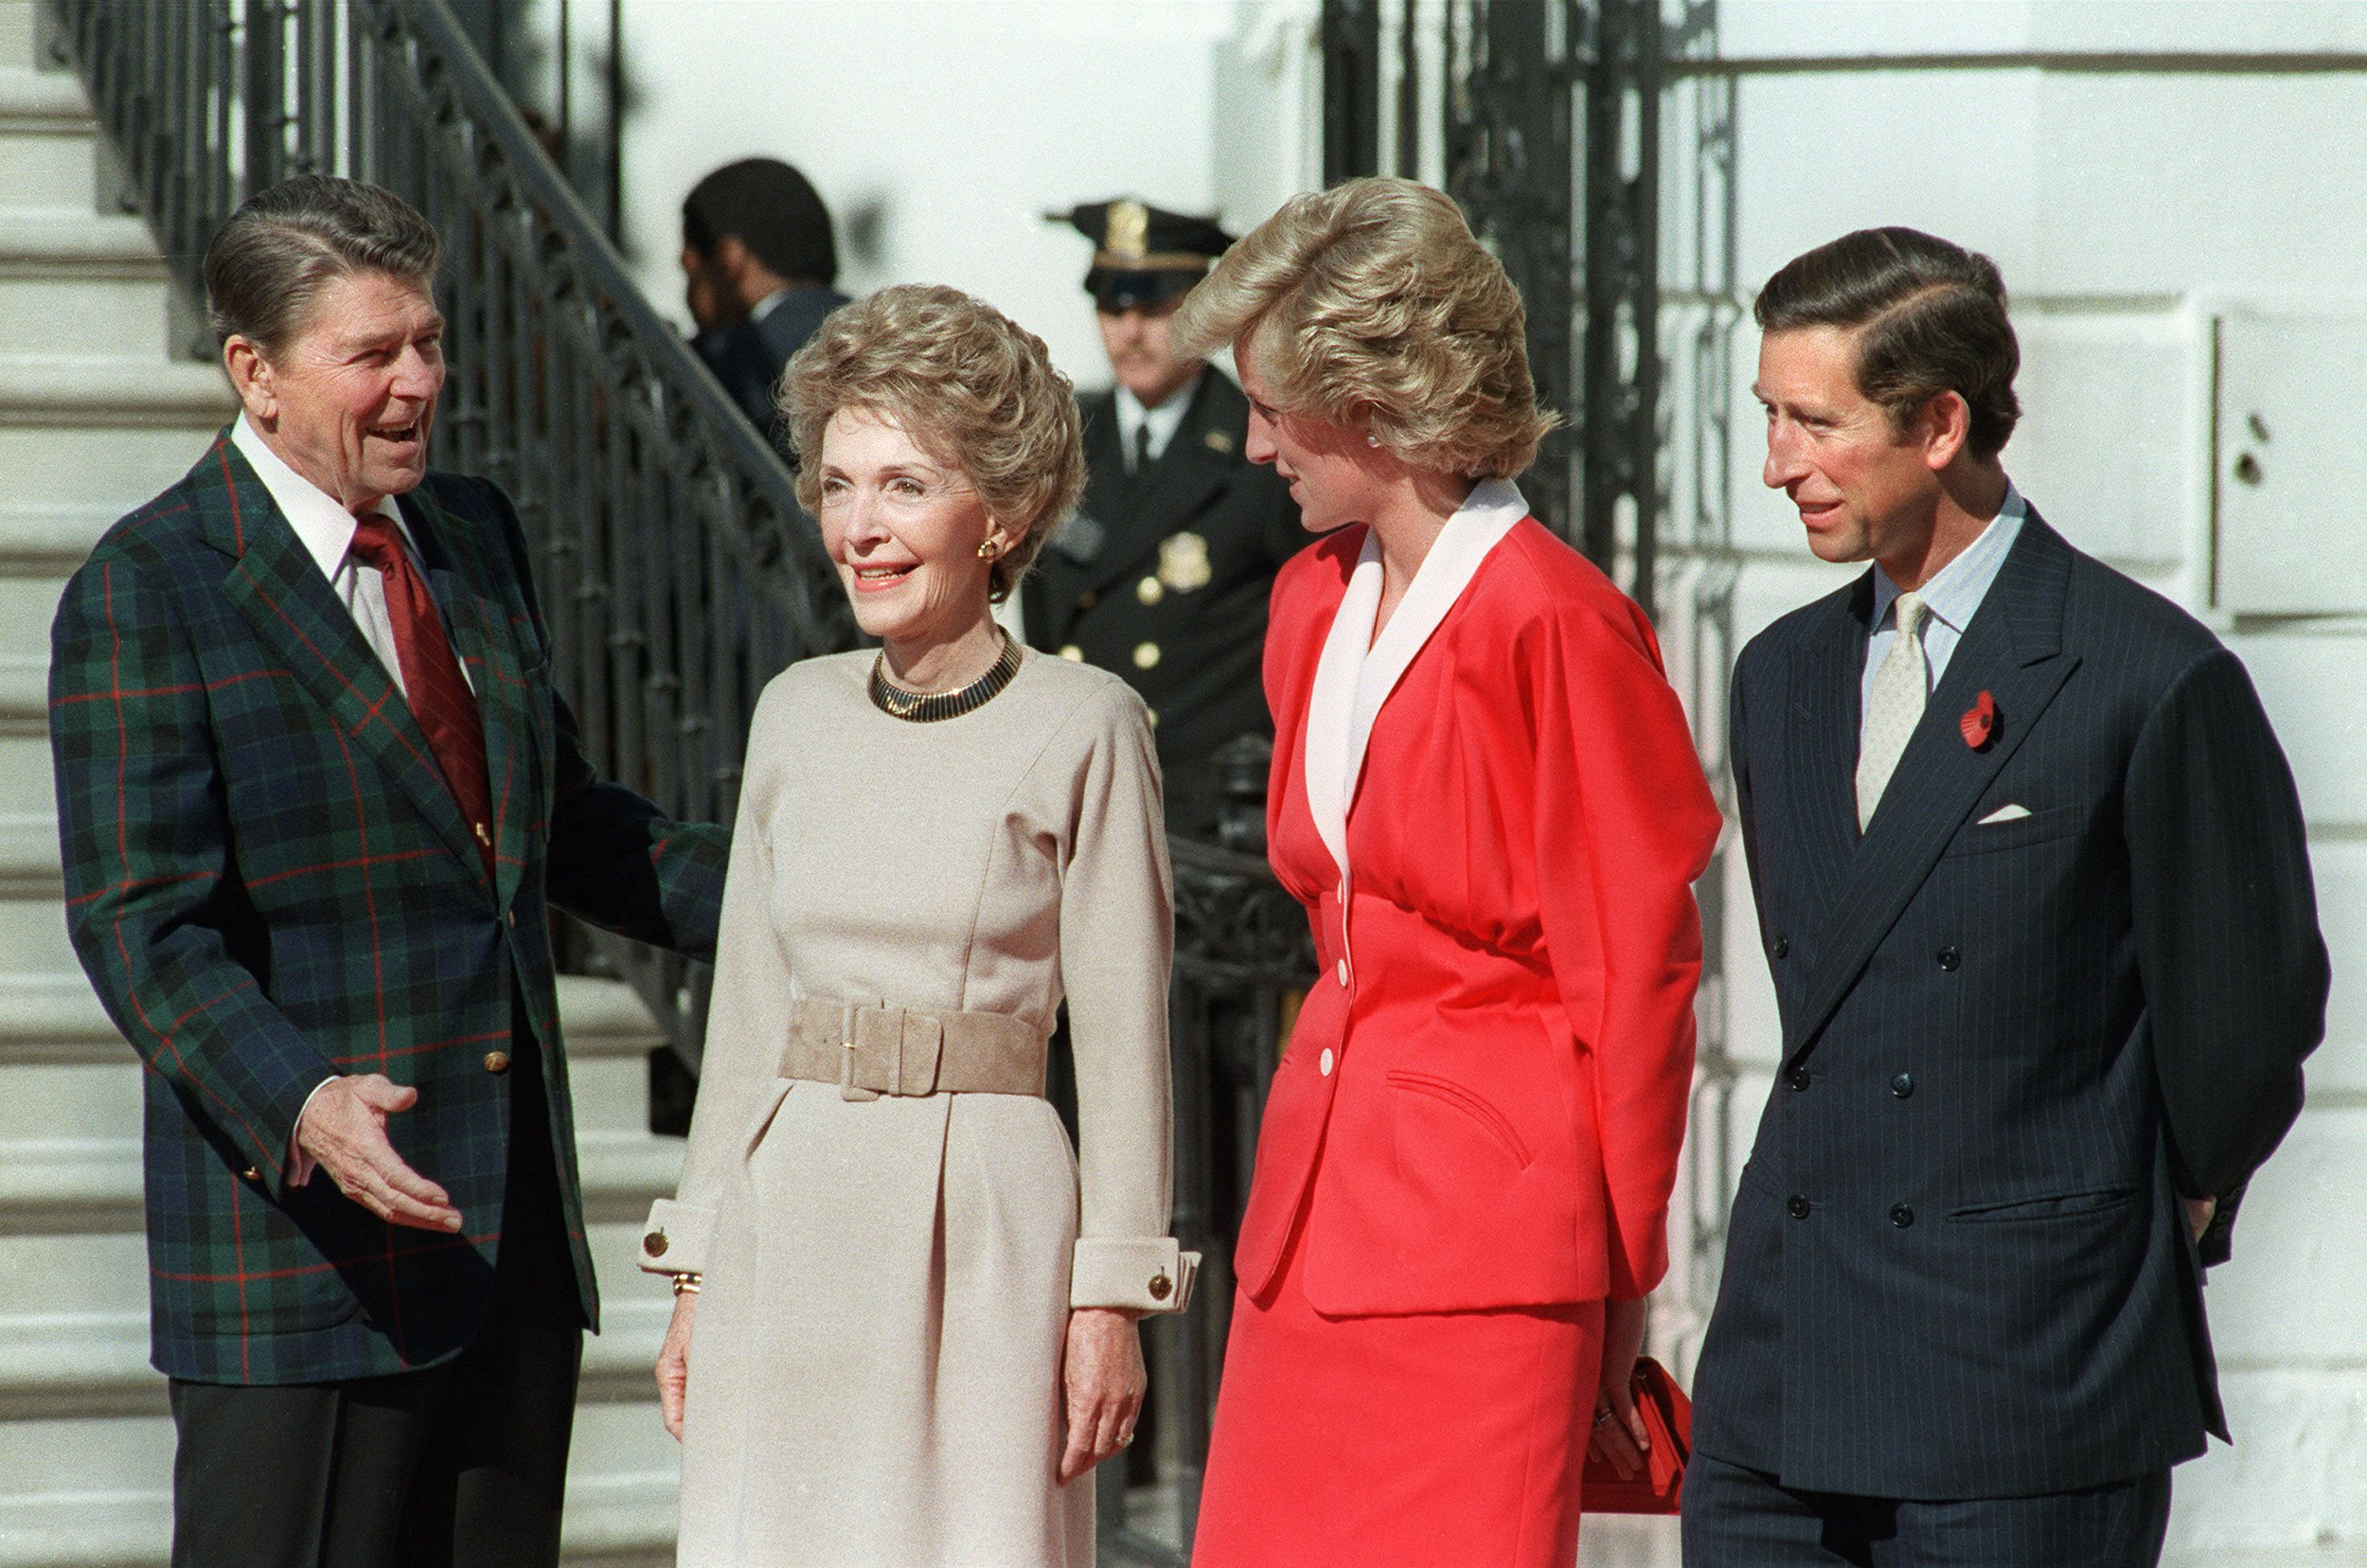 Ronald Reagan and Nancy Reagan welcoming to the White House Princess Diana and her husband Prince Charles on Nov. 9, 1985.